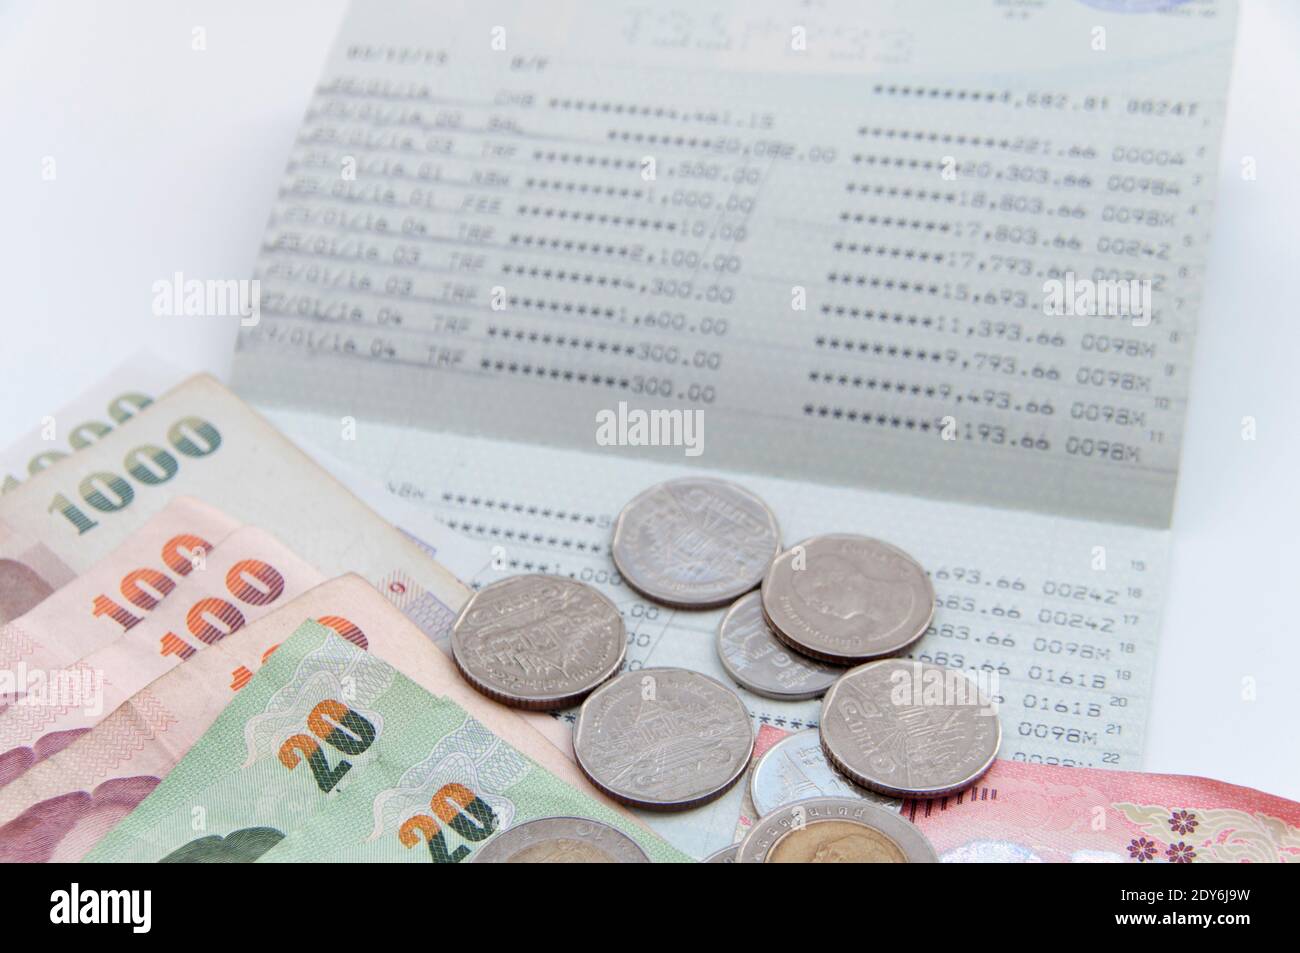 Close-up Of Currency And Passbook On White Background Stock Photo